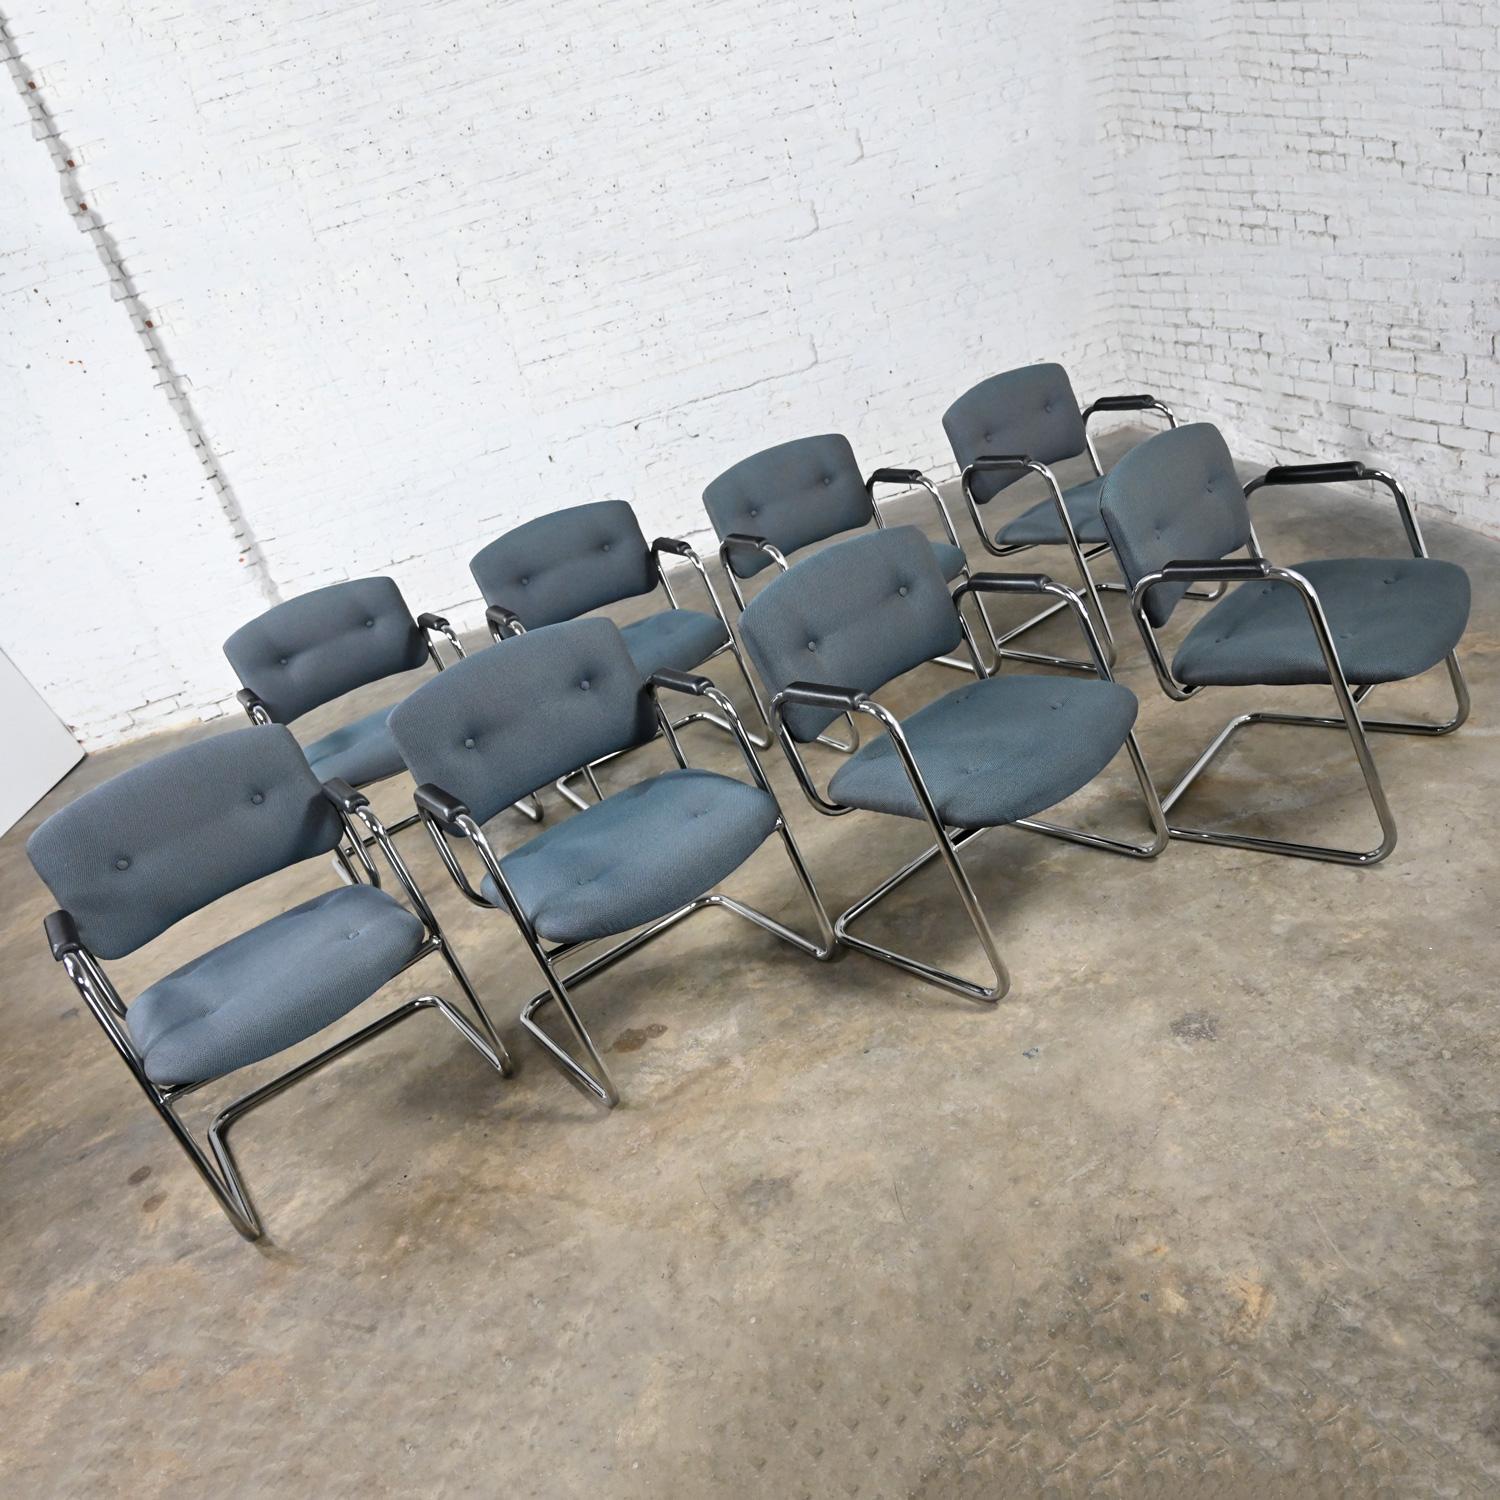 Late 20th Century Gray & Chrome Cantilever Chairs Style Steelcase Set of 8 In Good Condition For Sale In Topeka, KS